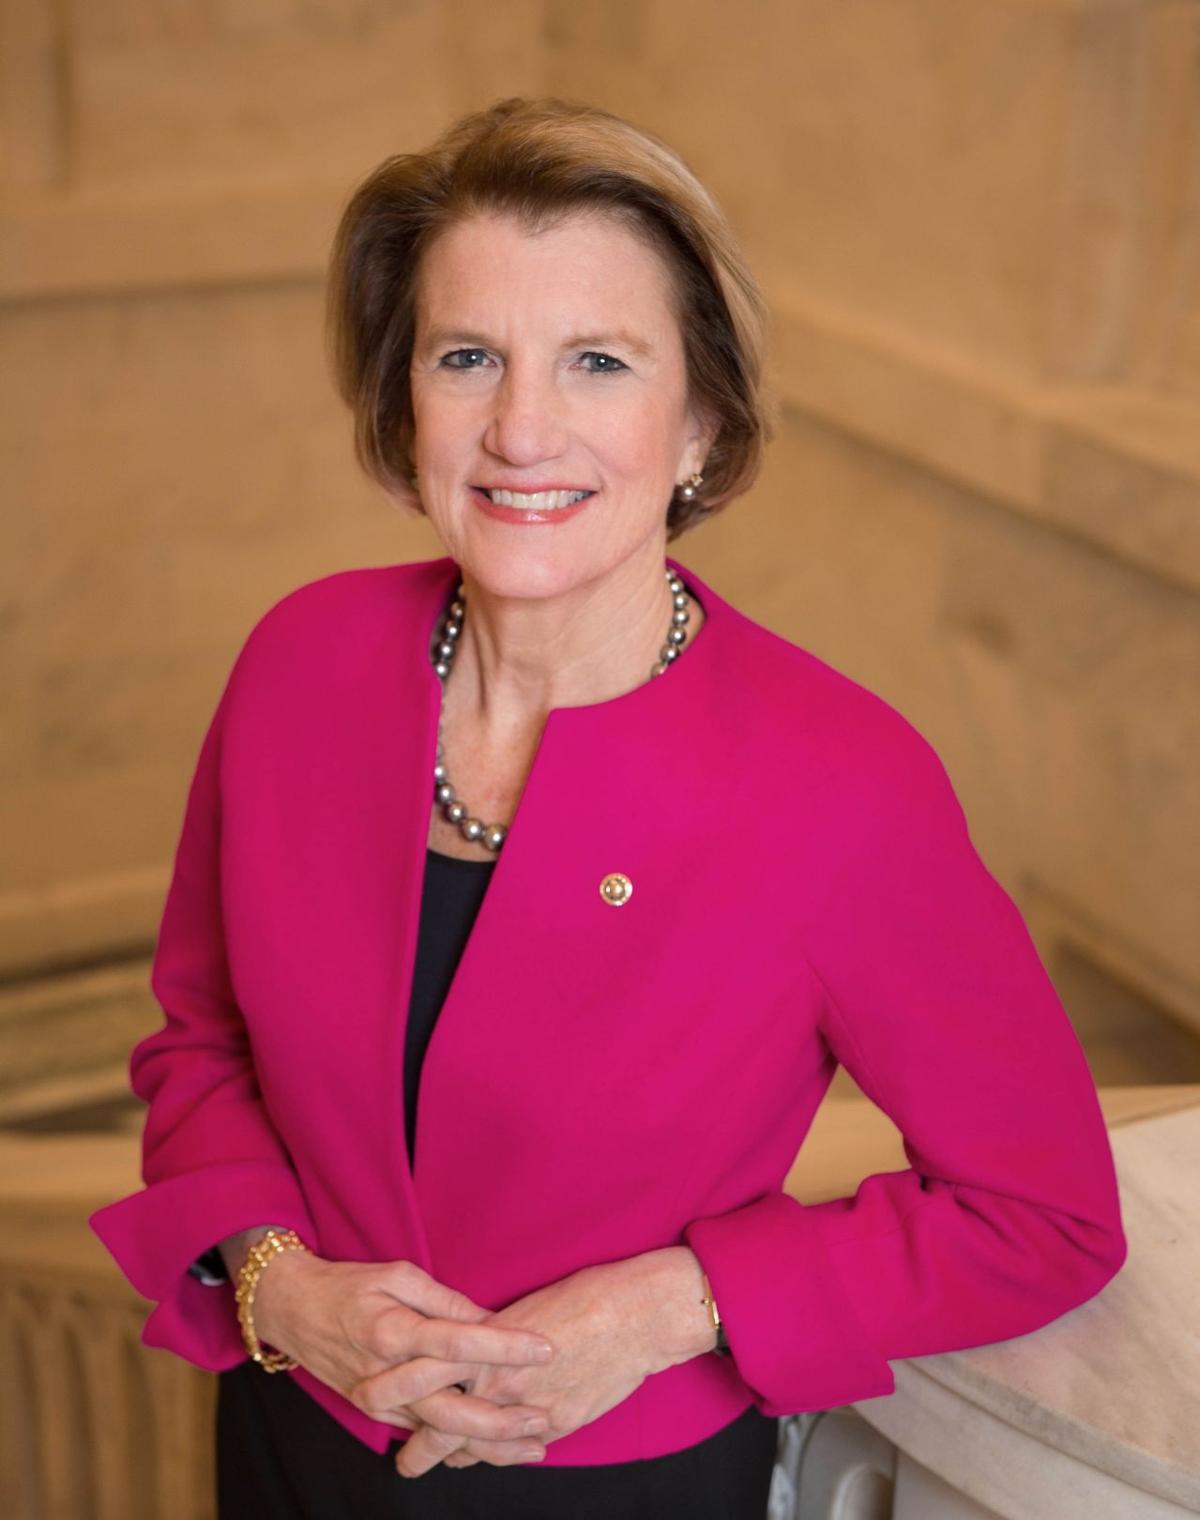 Sen Shelley Moore Capito Core Act Targets Underserved Communities Daily Mail Opinion